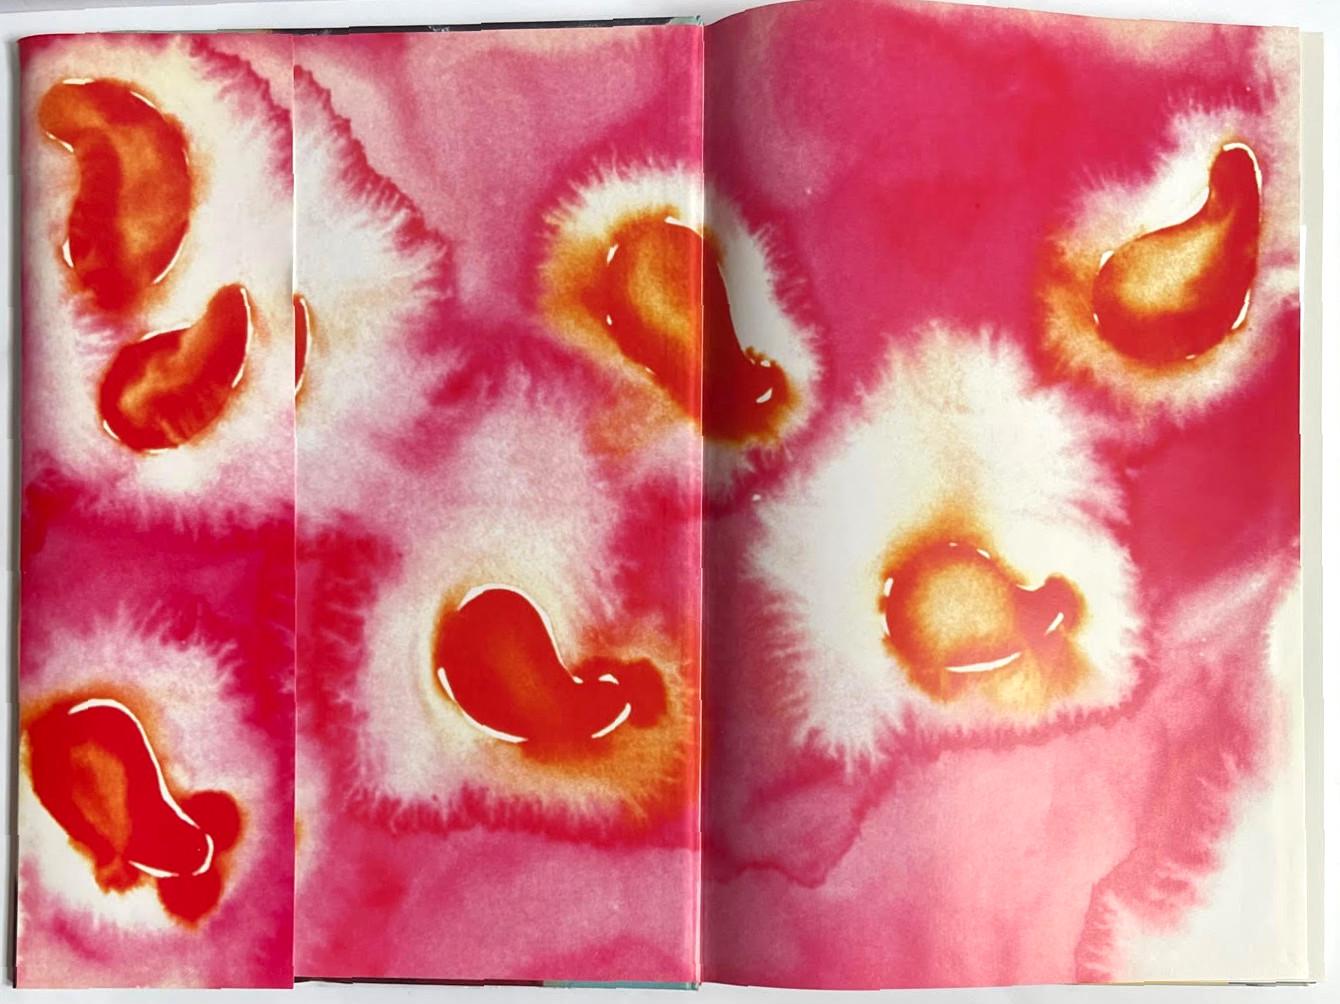 Hardback monograph: Life is Paradise (Hand signed by Francesco Clemente) For Sale 7